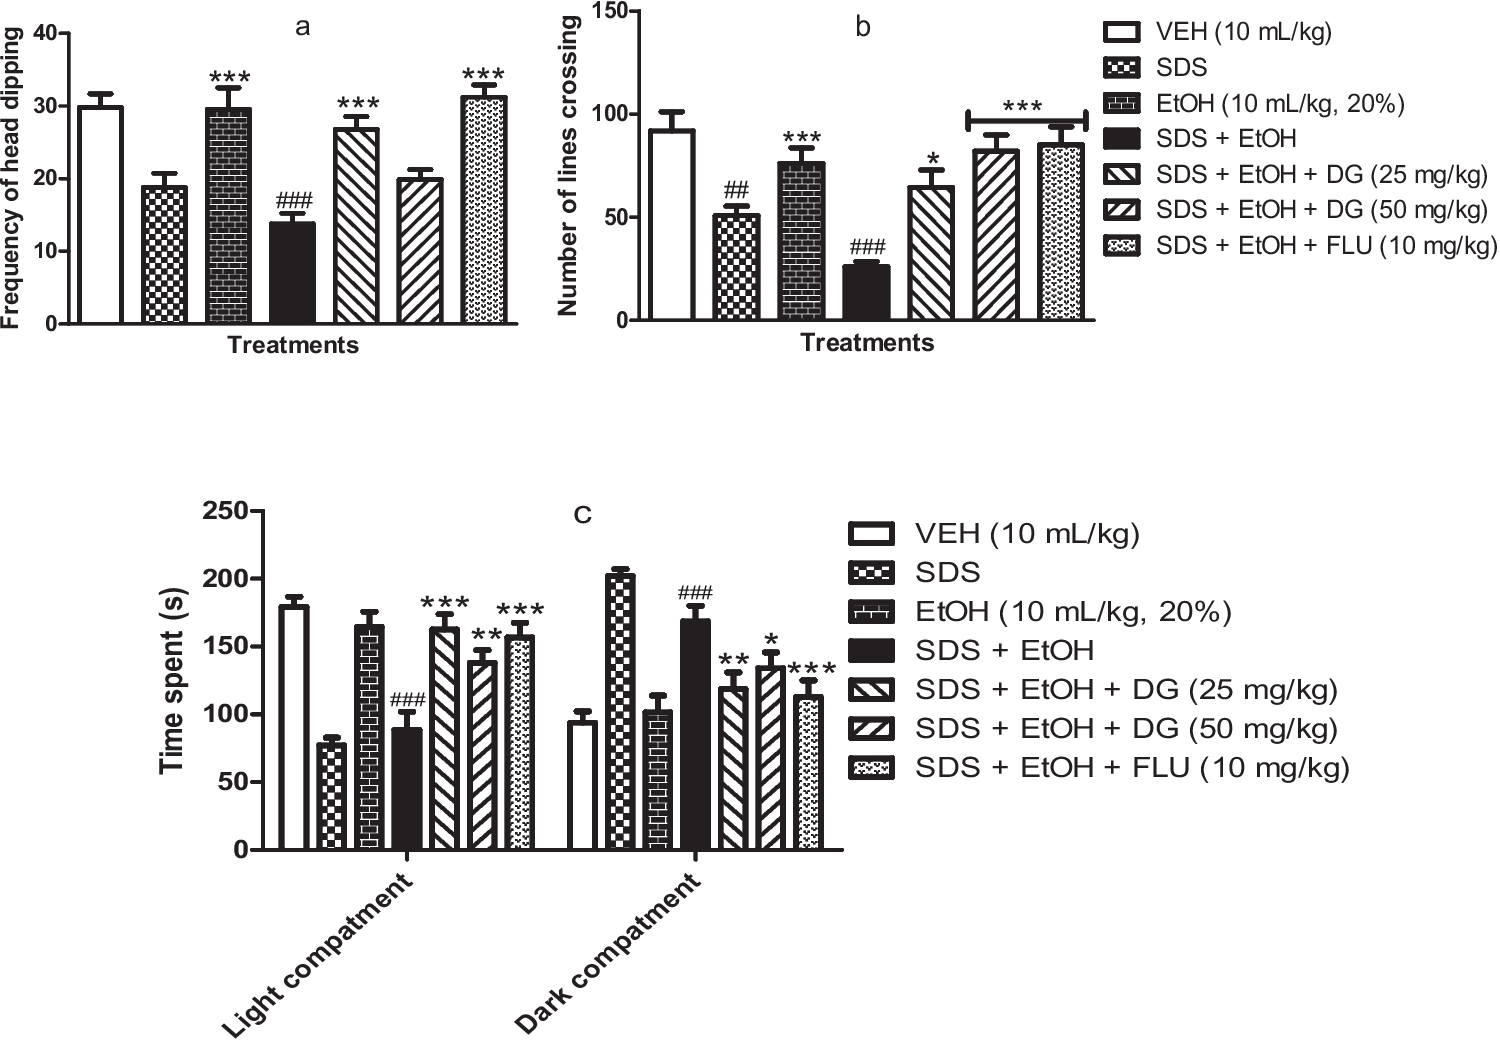 Diosgenin alleviates alcohol-mediated escalation of social defeat stress and the neurobiological sequalae